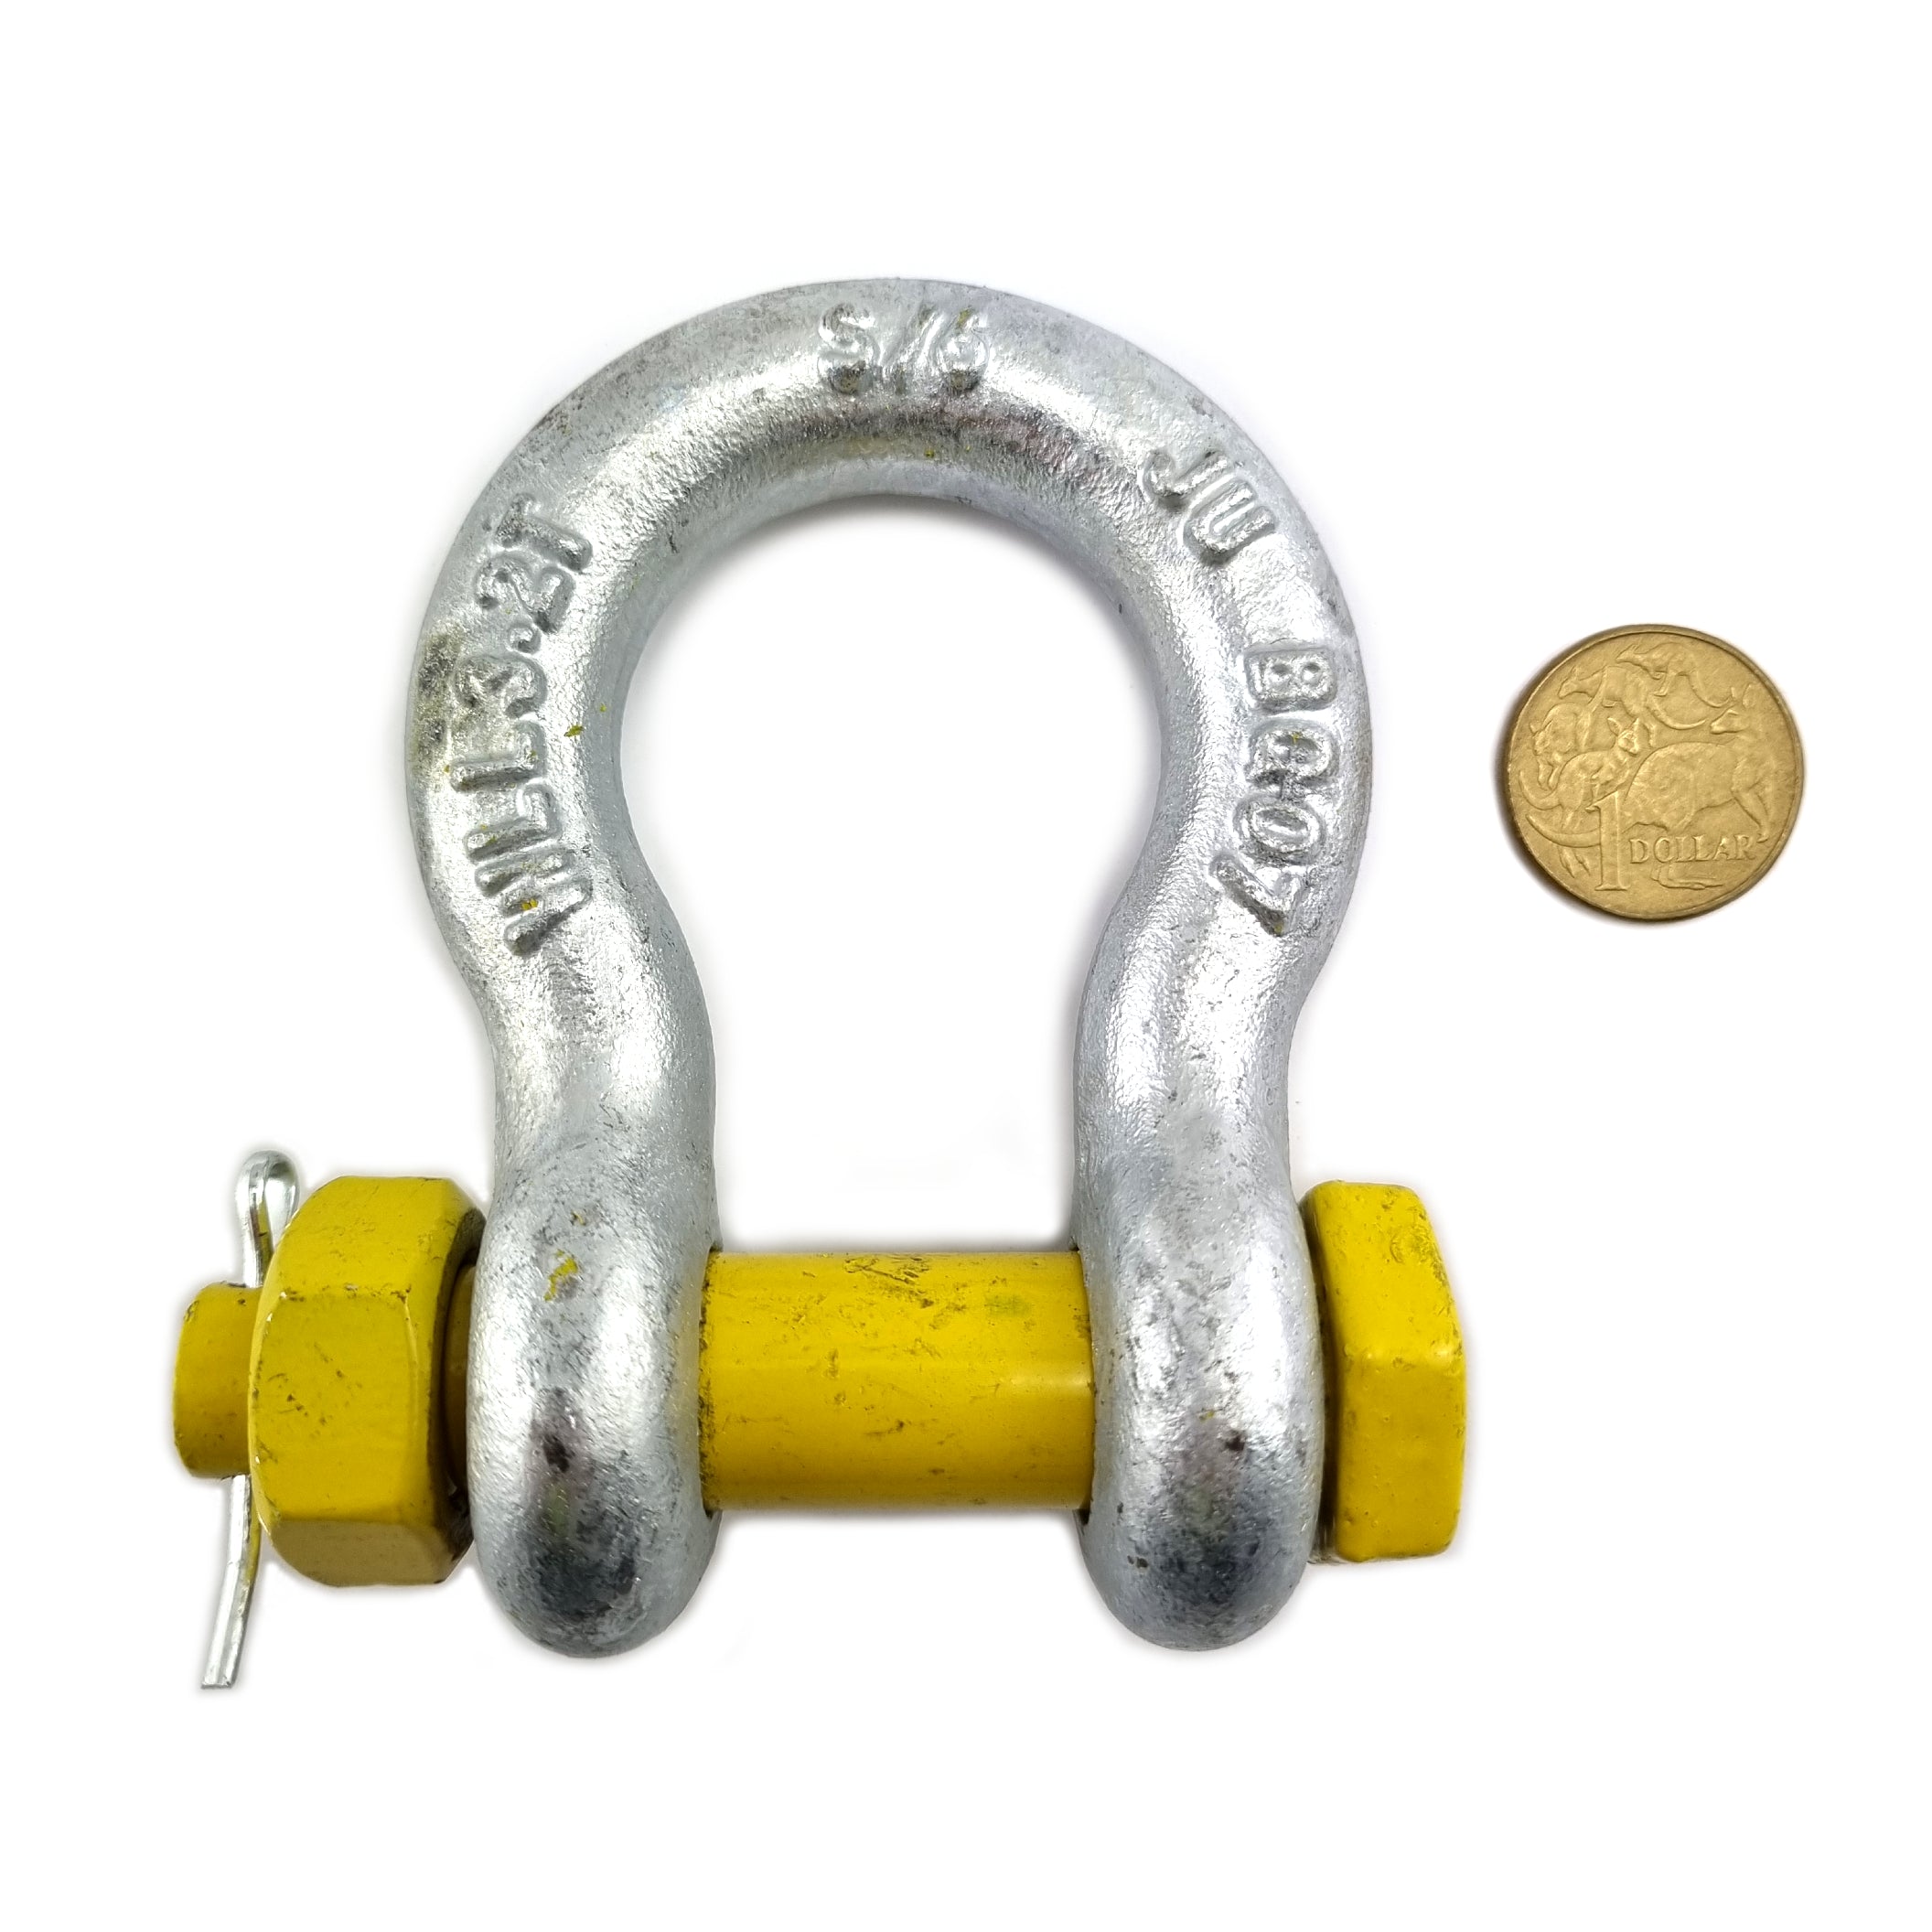 3.2 Tonne galvanised bow shackle, grade S, complies with AS 2741. Shop hardware online chain.com.au